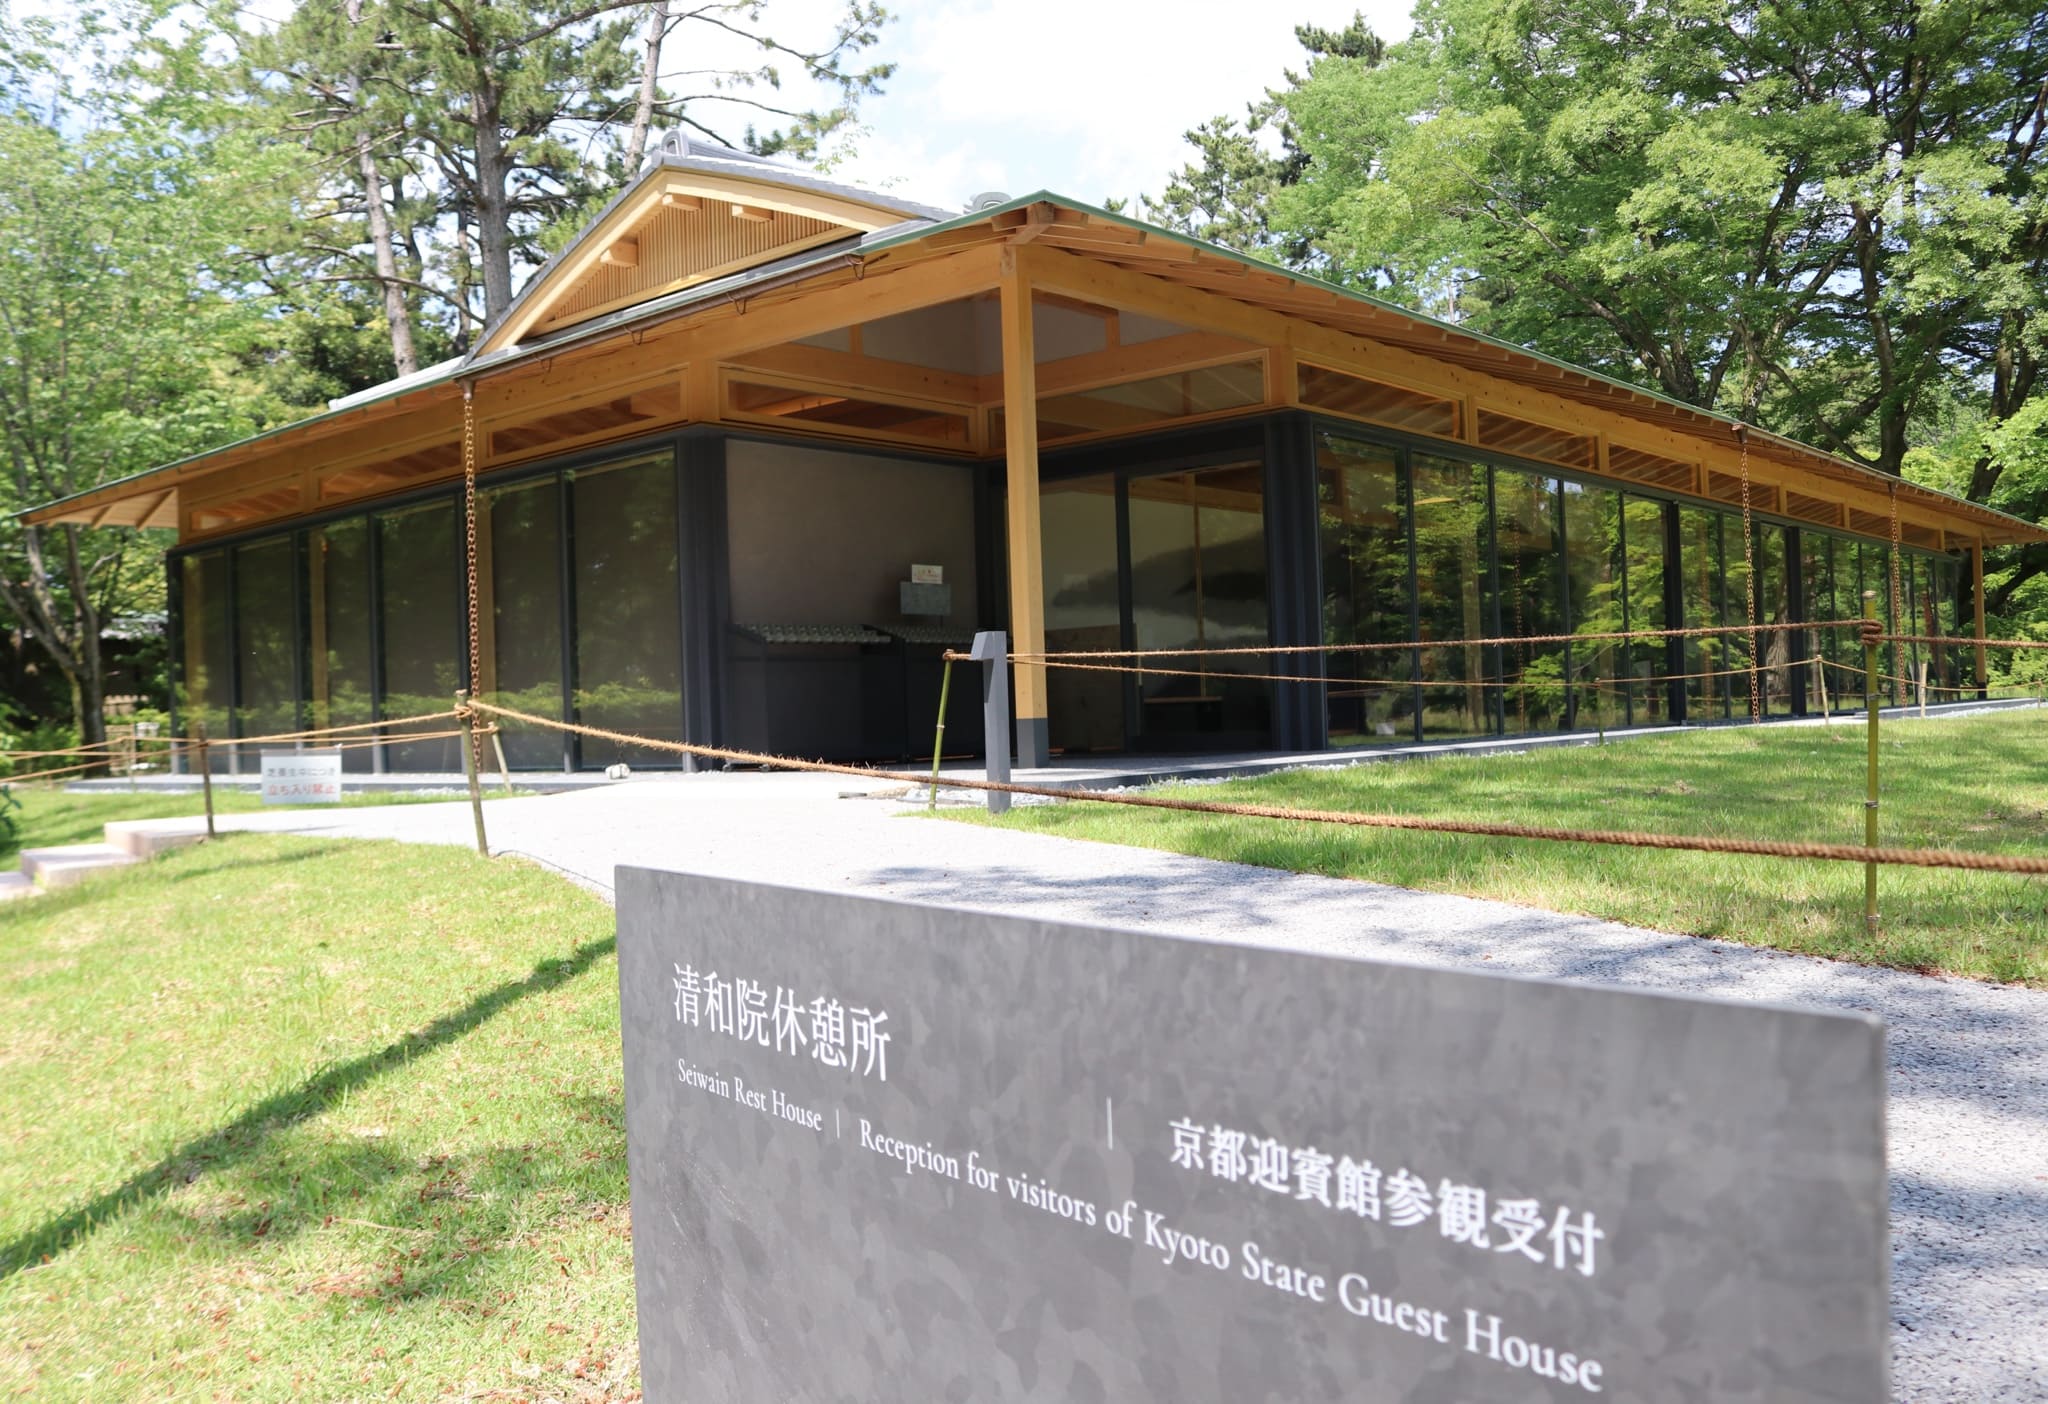 A photo of the exterior of the Sewain Rest House, with a placard in front. The modern building has glass walls and a roof with elements of traditional Japanese architecture.